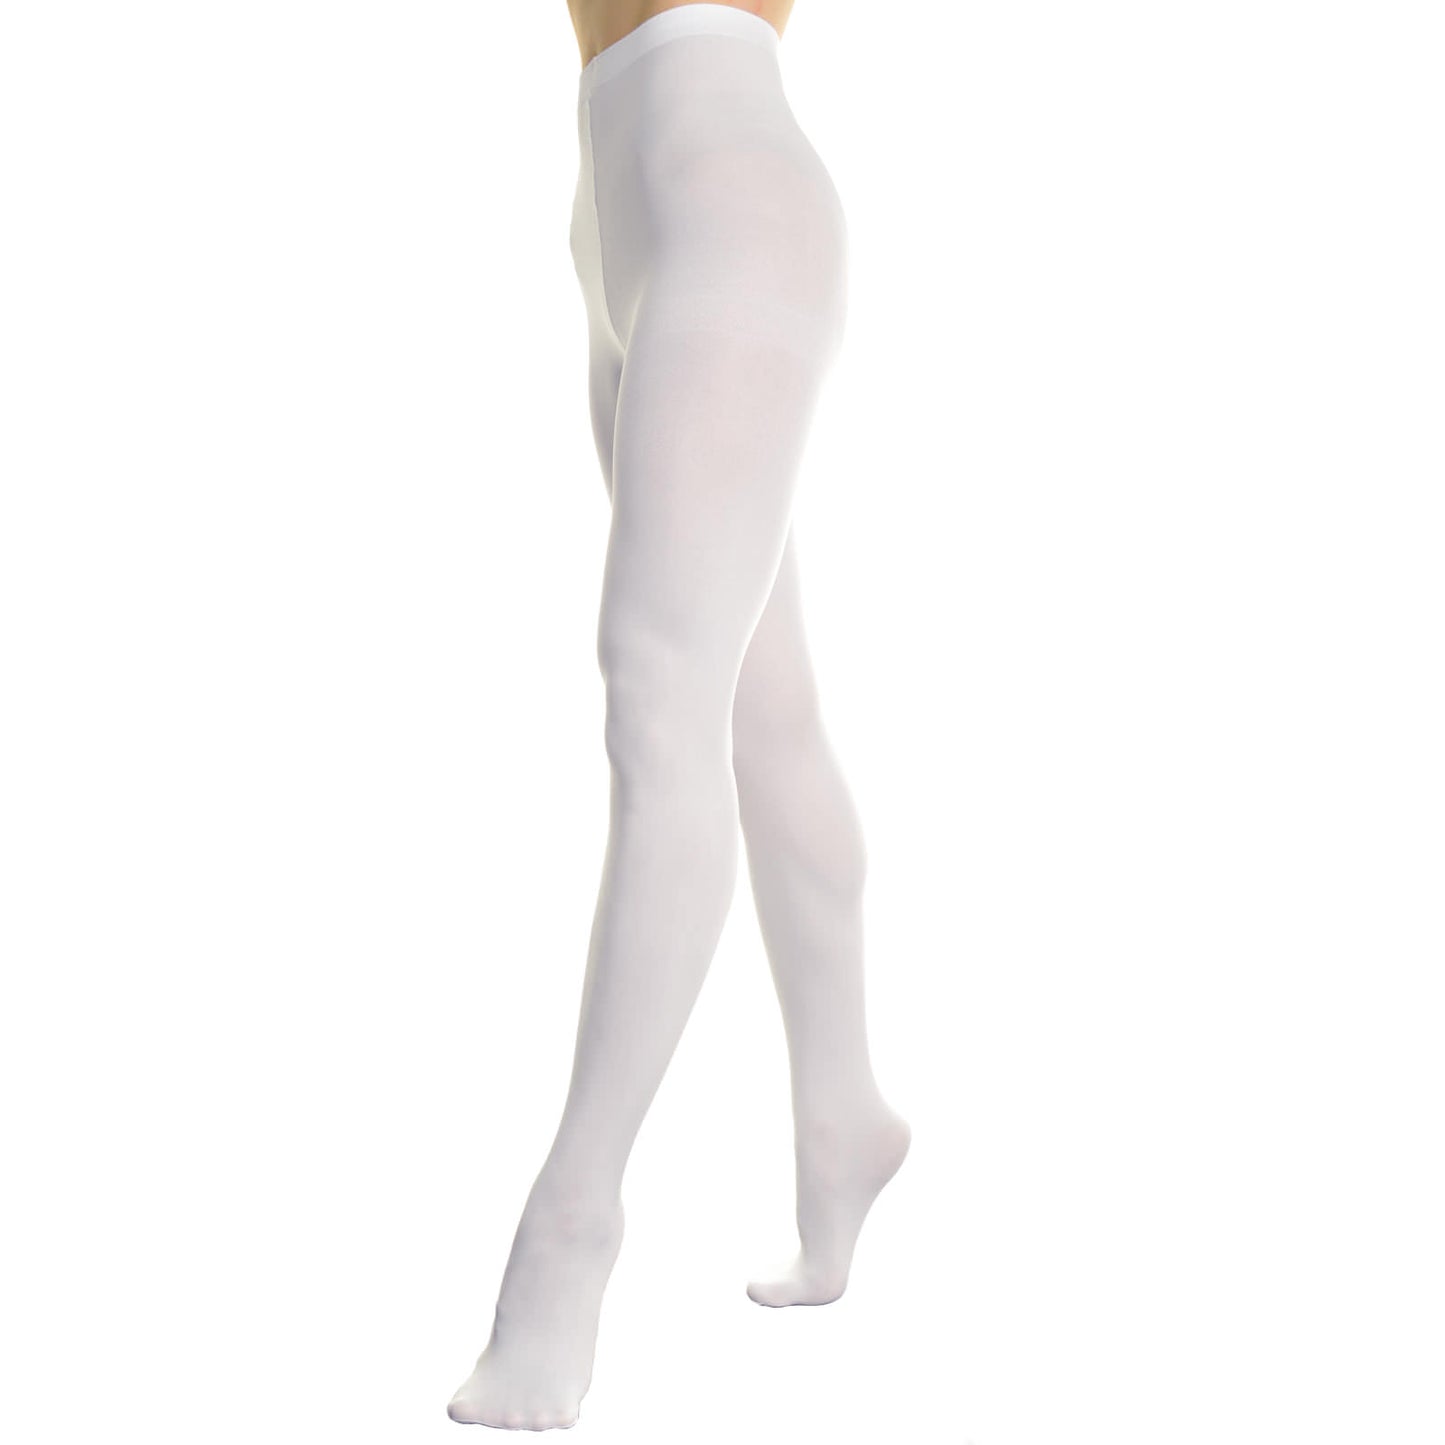 Angelina 70D Opaque Tights (6-Pack), #7900